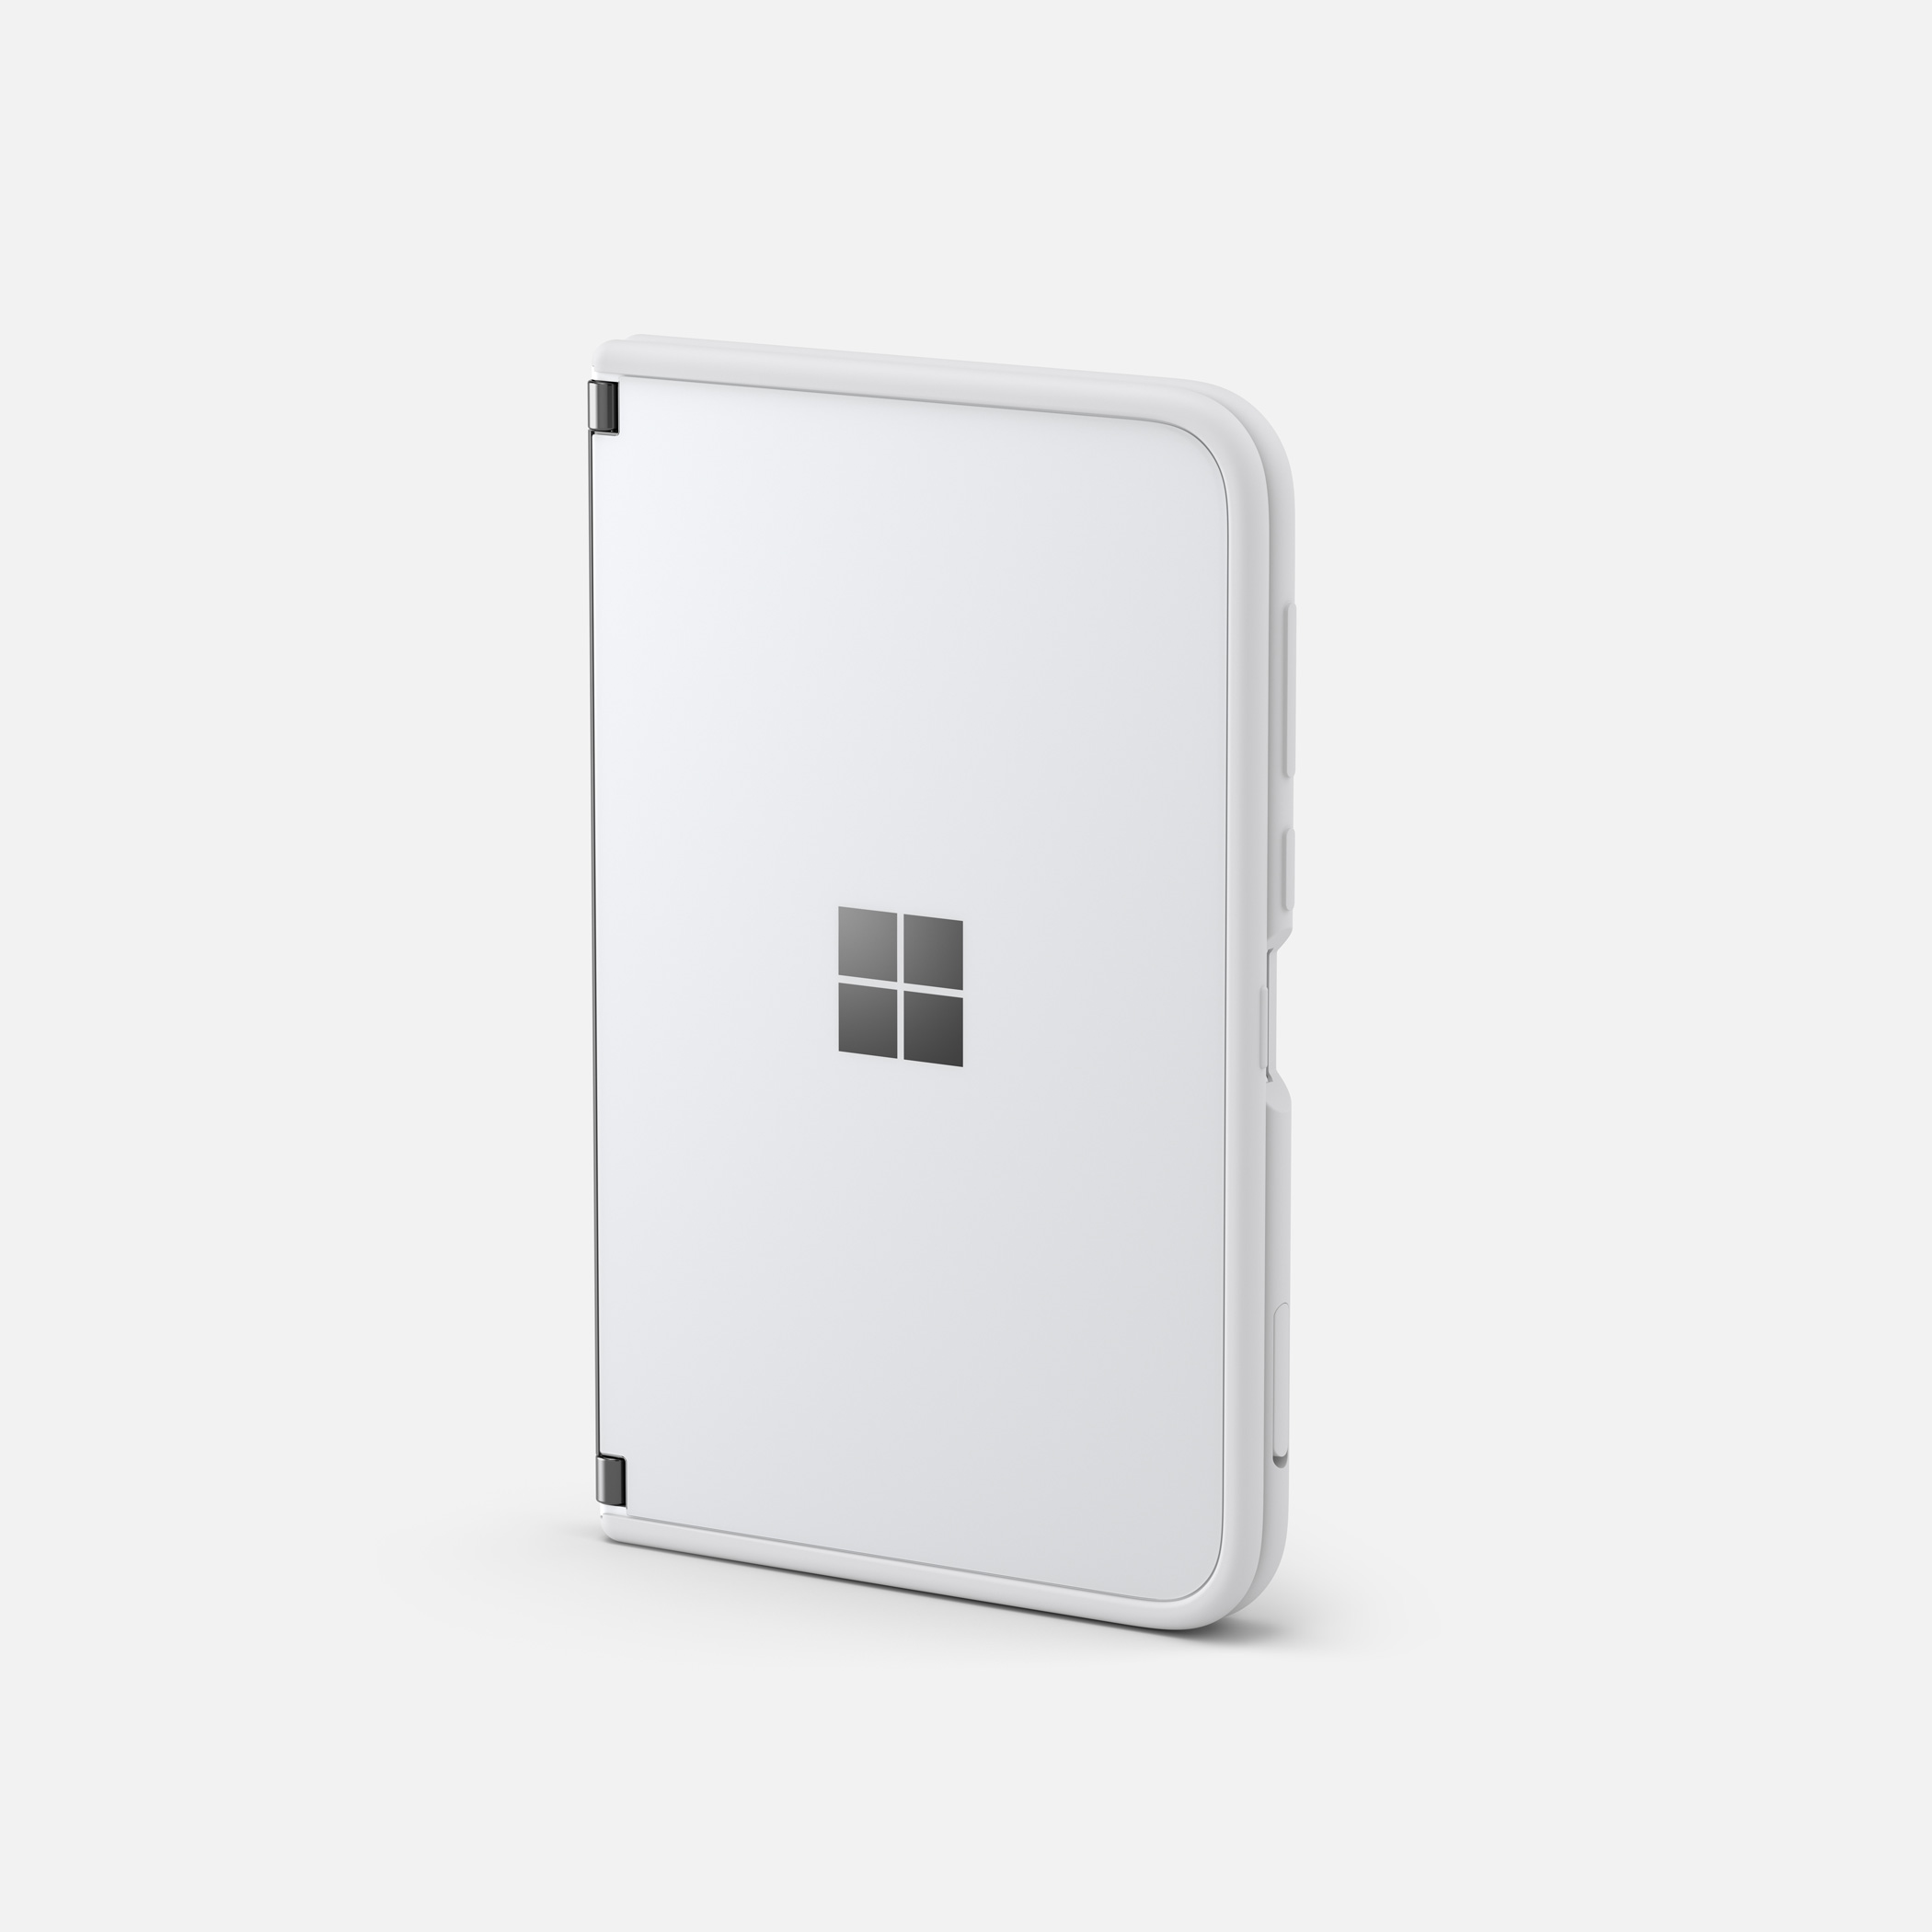 Microsoft surface duo finally available in more regions 532219 2